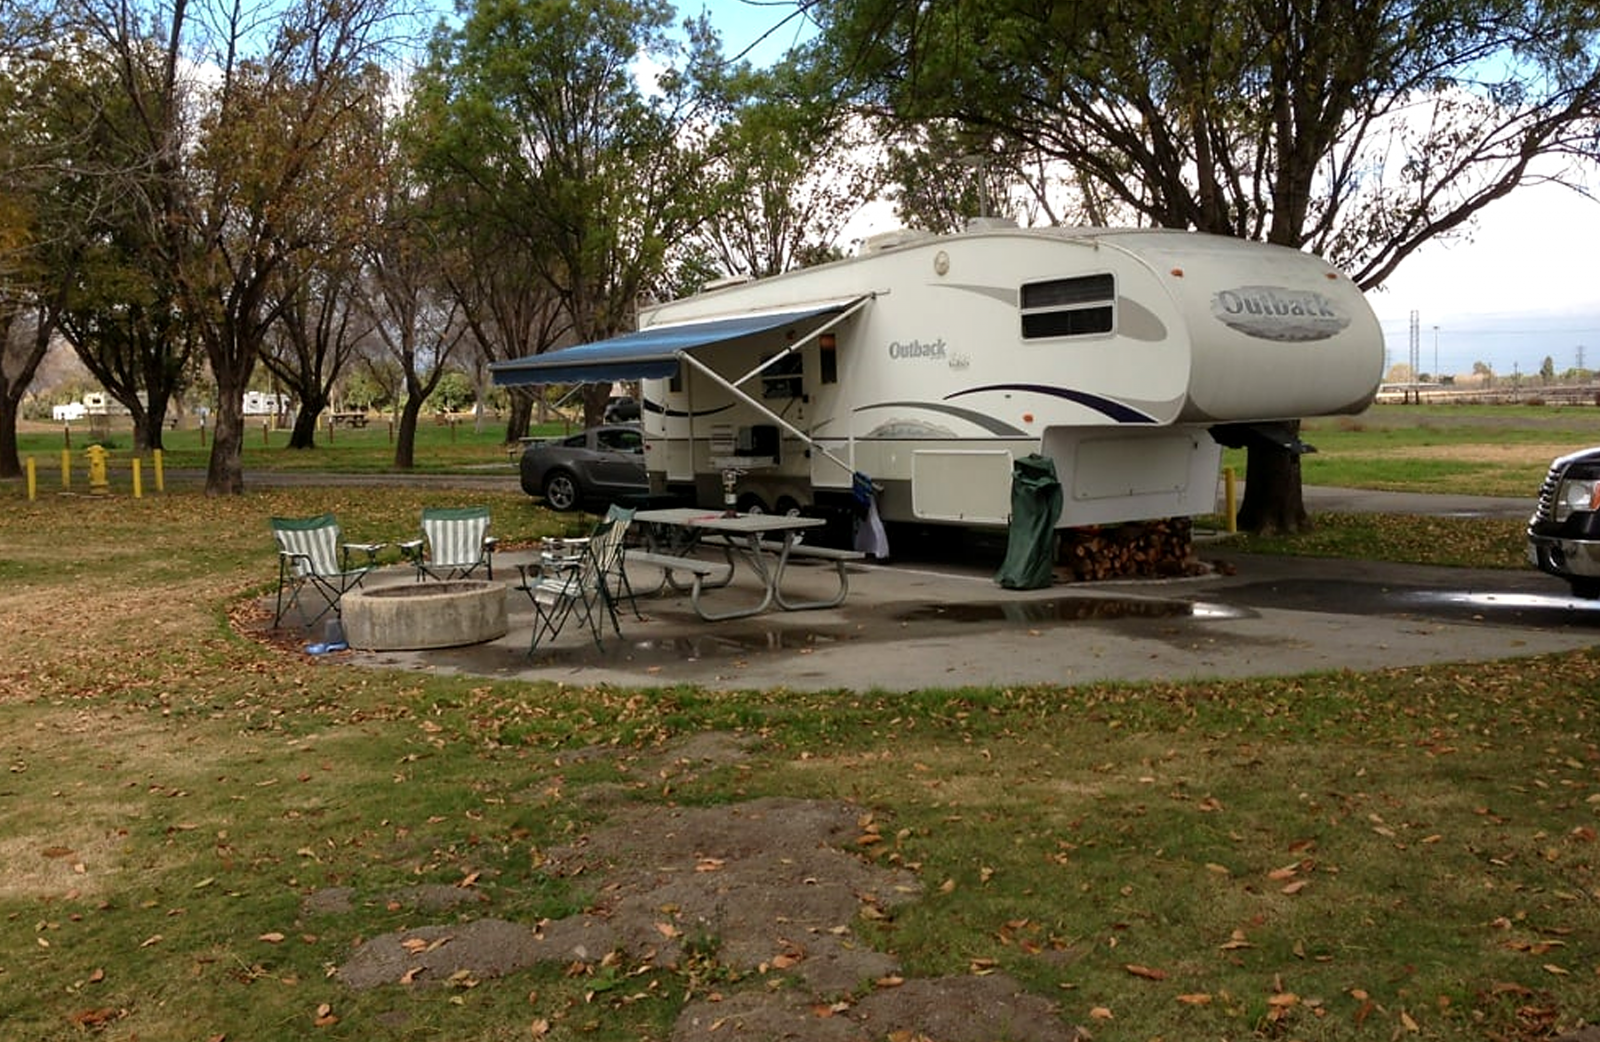 A single camping trailer sits on a concrete slab near grass and a fire ring at Prado park.